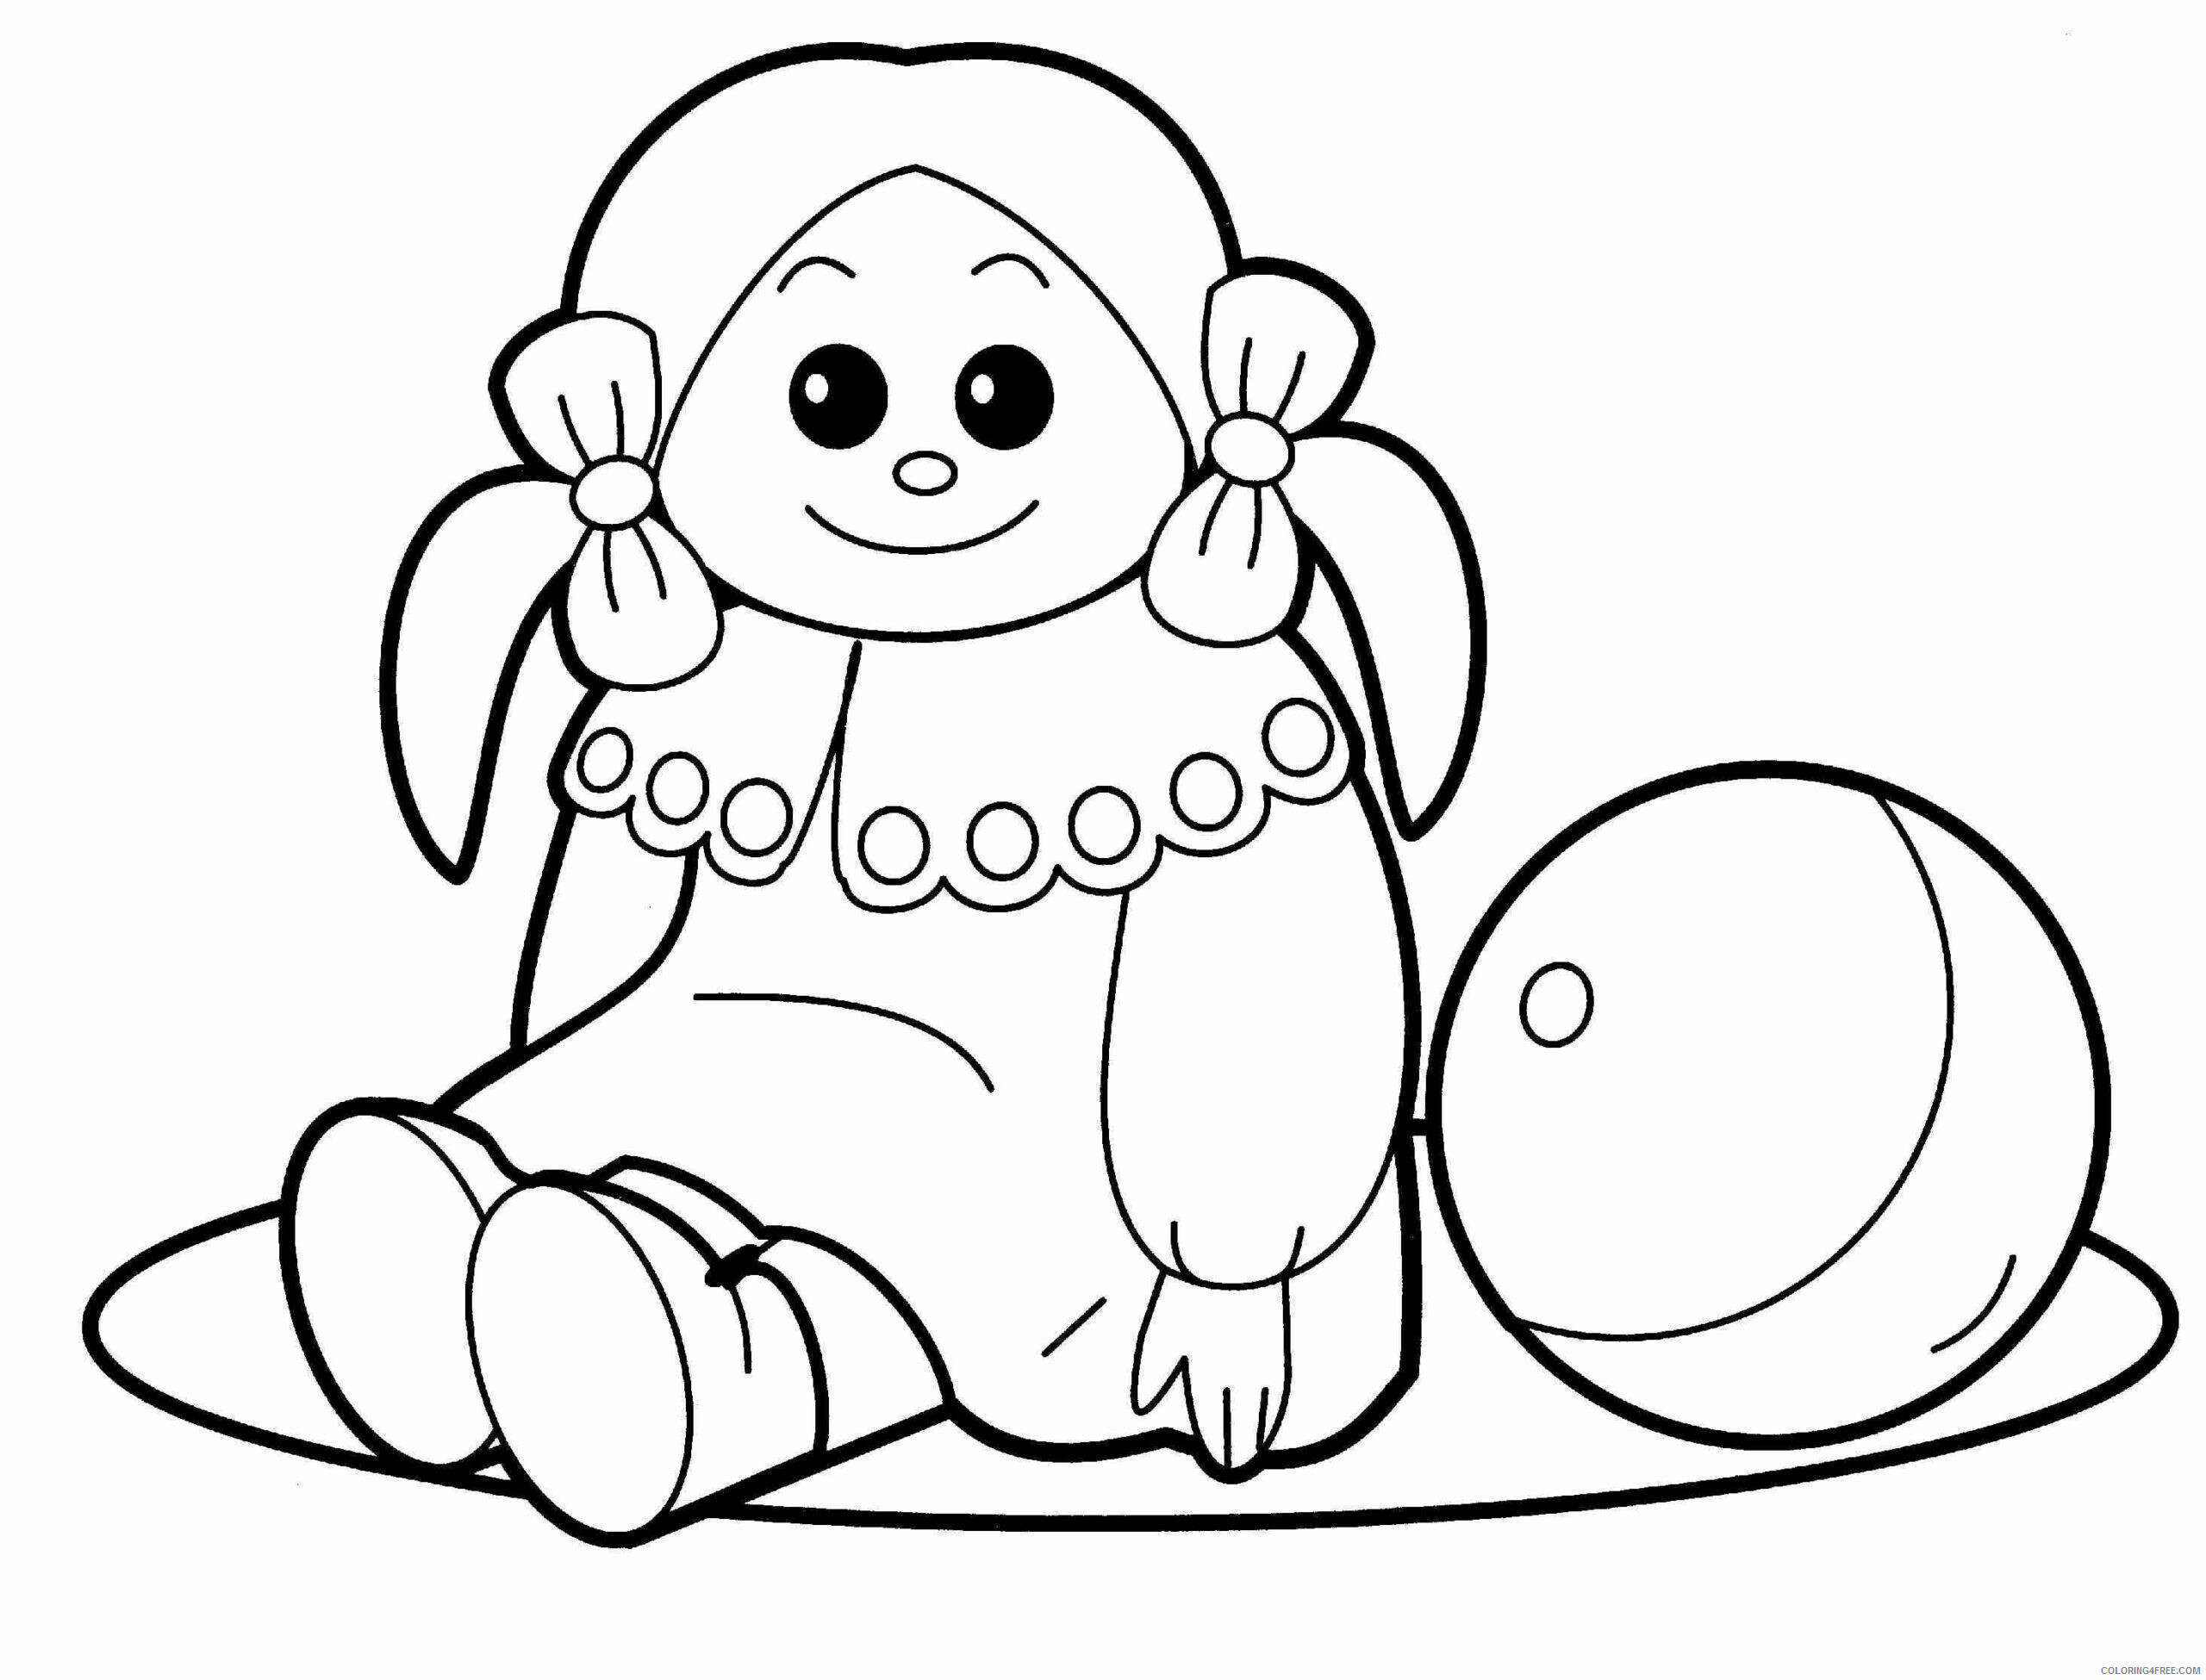 Doll Coloring Pages for Girls Free Doll Printable 2021 0390 Coloring4free